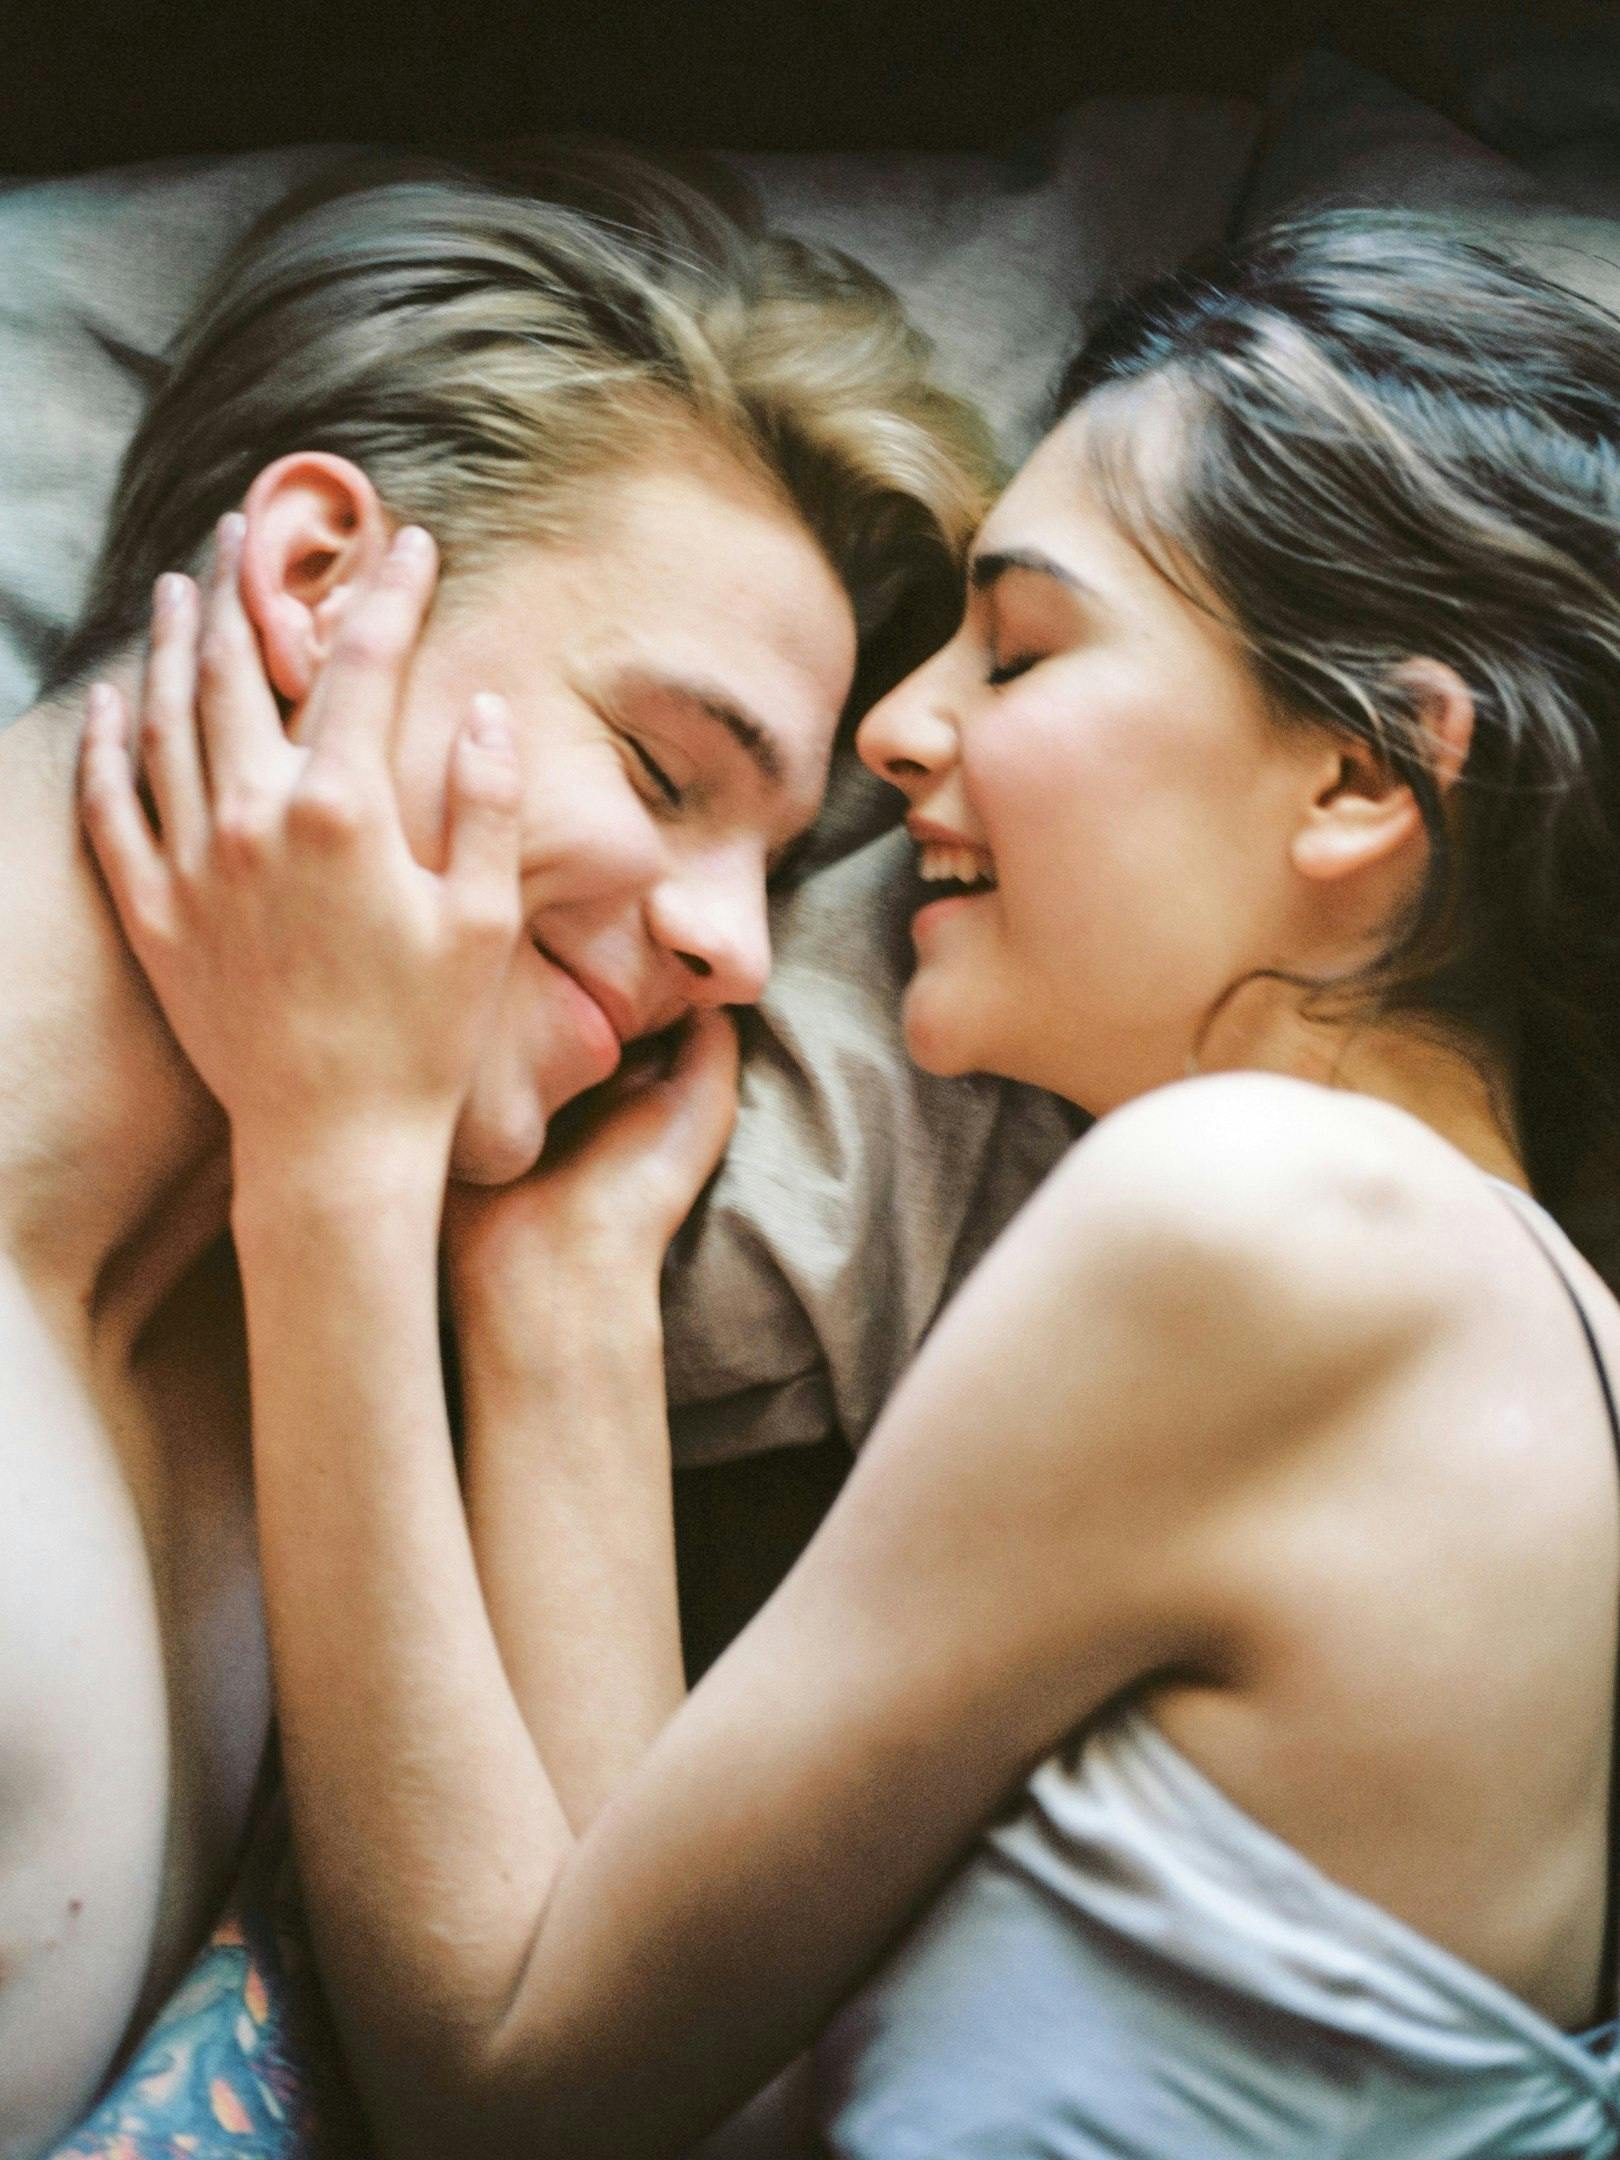 A happy couple lying in bed | Source: Pexels